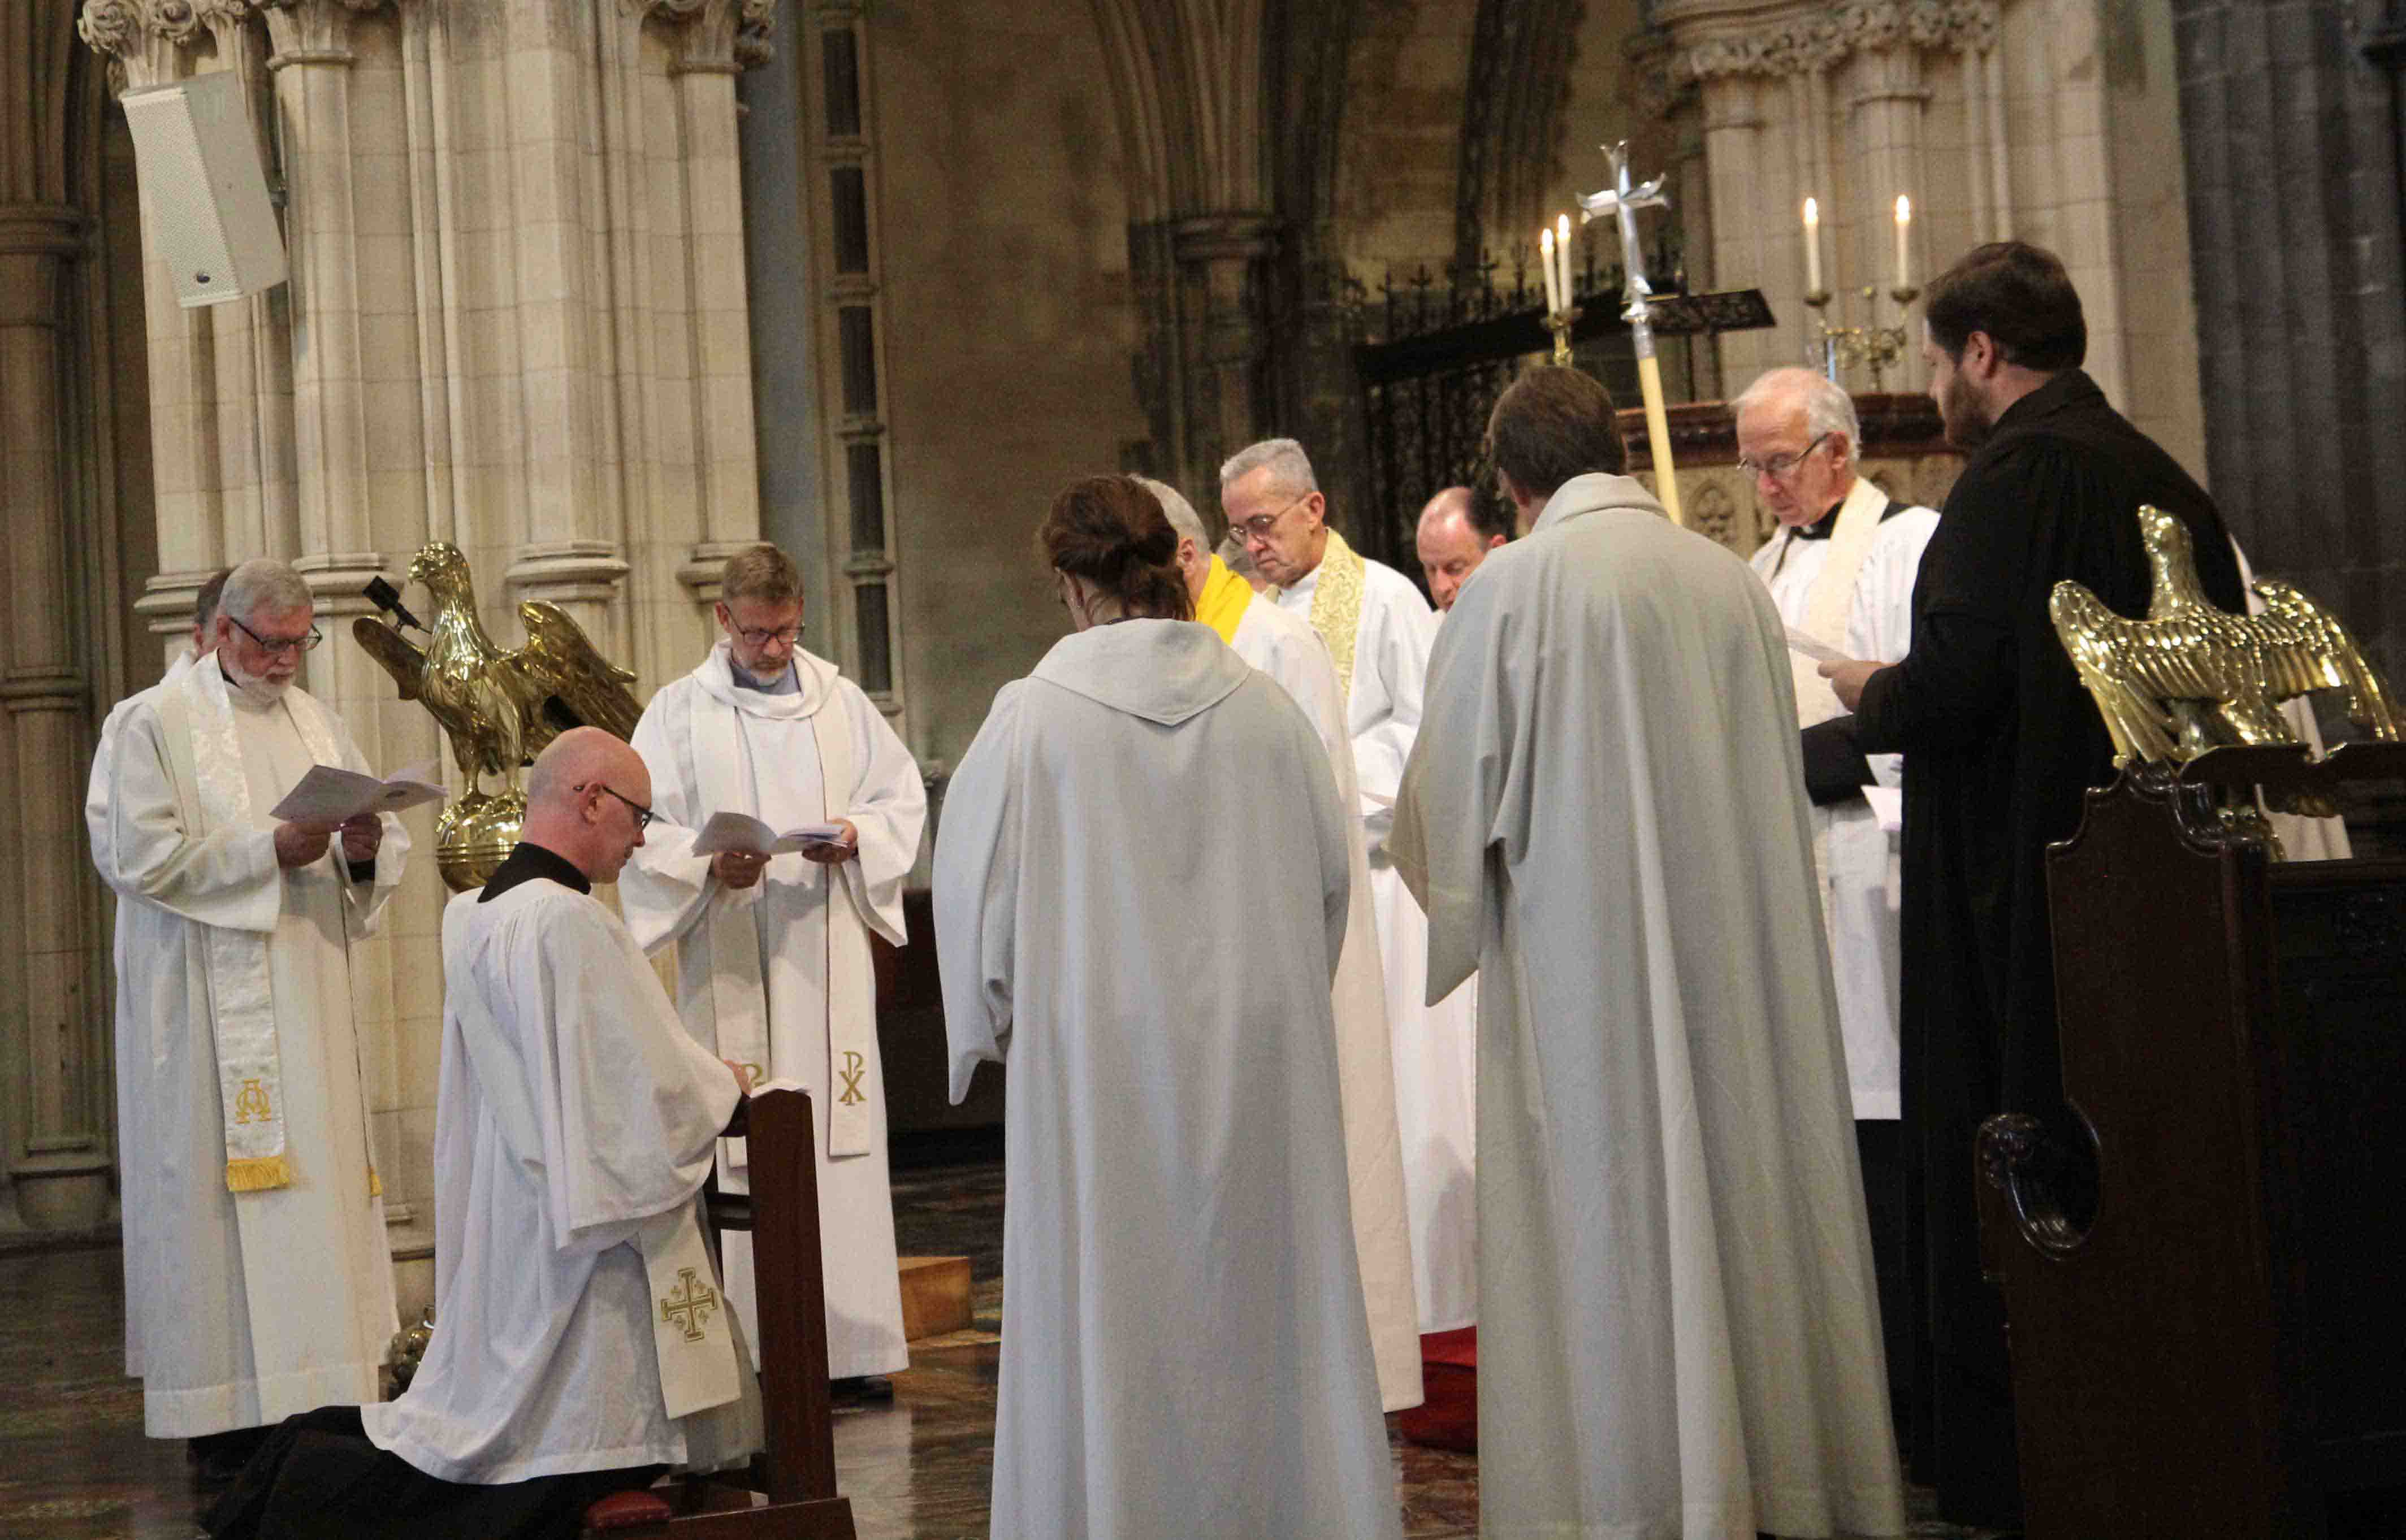 The Revd Tom O'Brien is ordained to the Priesthood in Christ Church Cathedral.